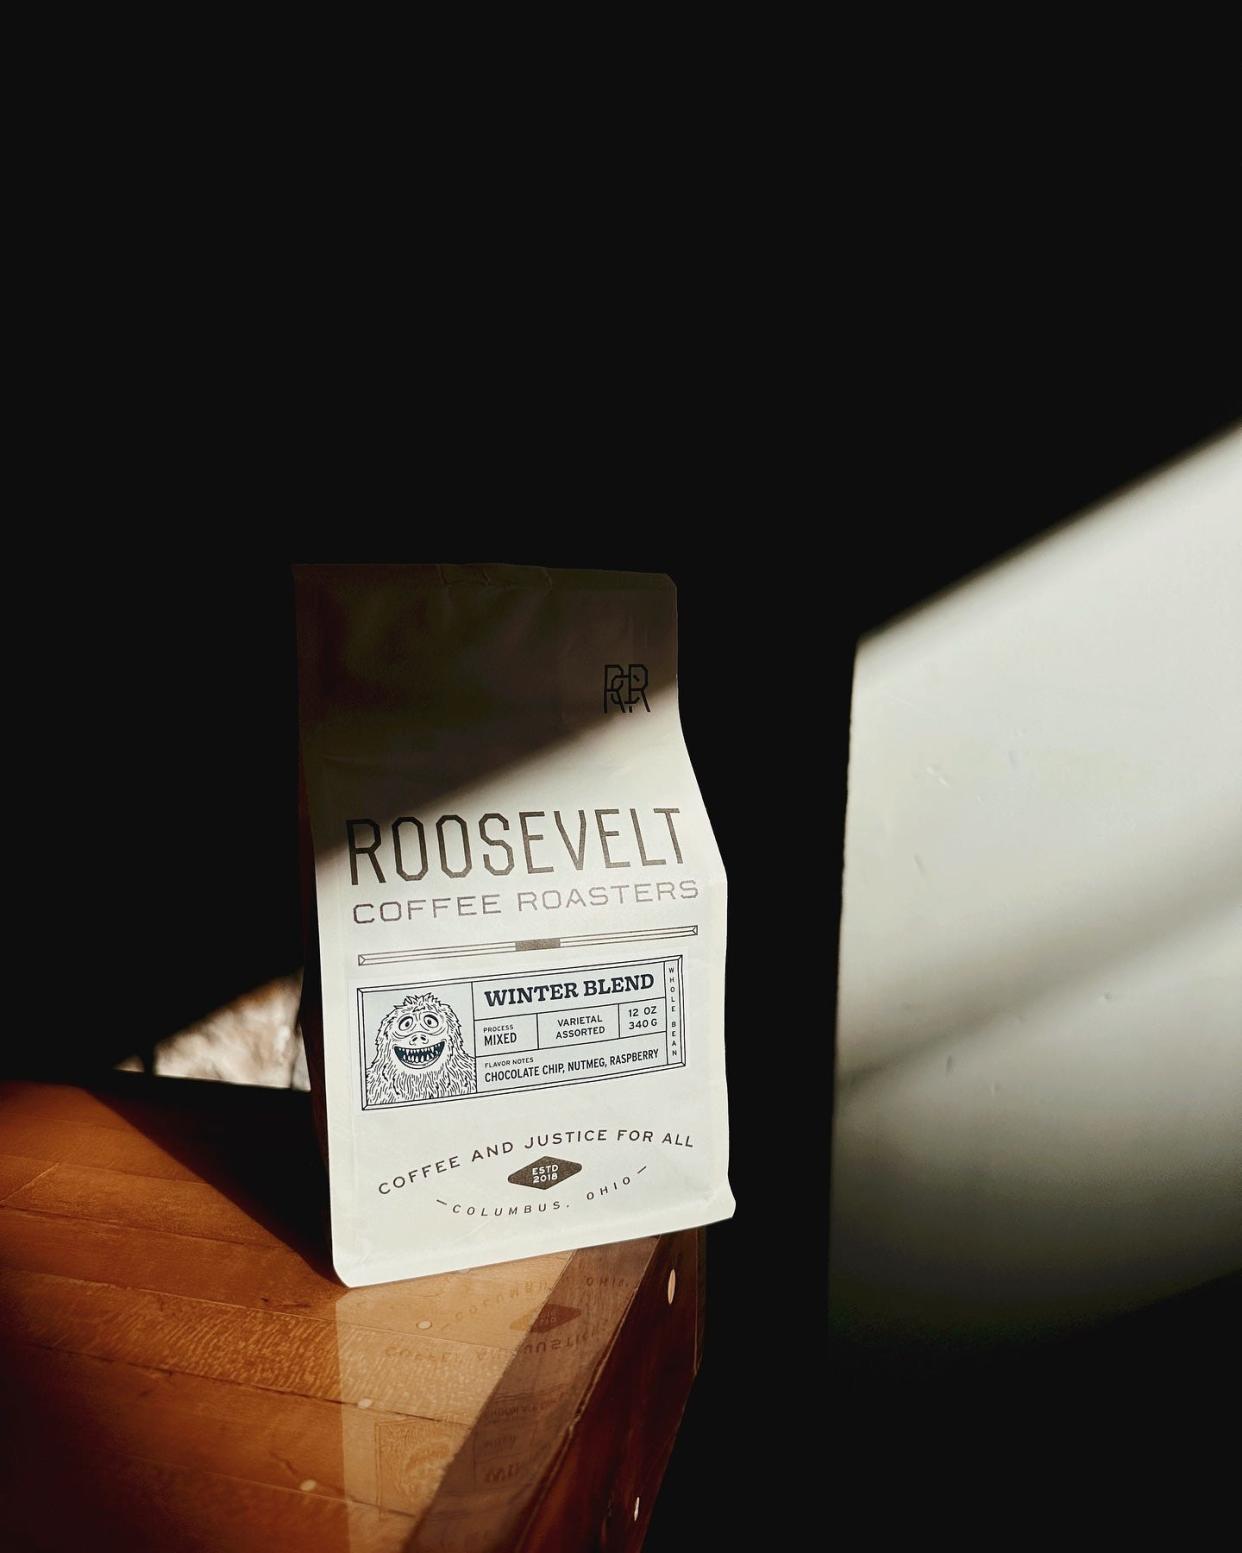 The Winter Blend at Roosevelt Coffee House has hints of chocolate, nutmeg and raspberry.